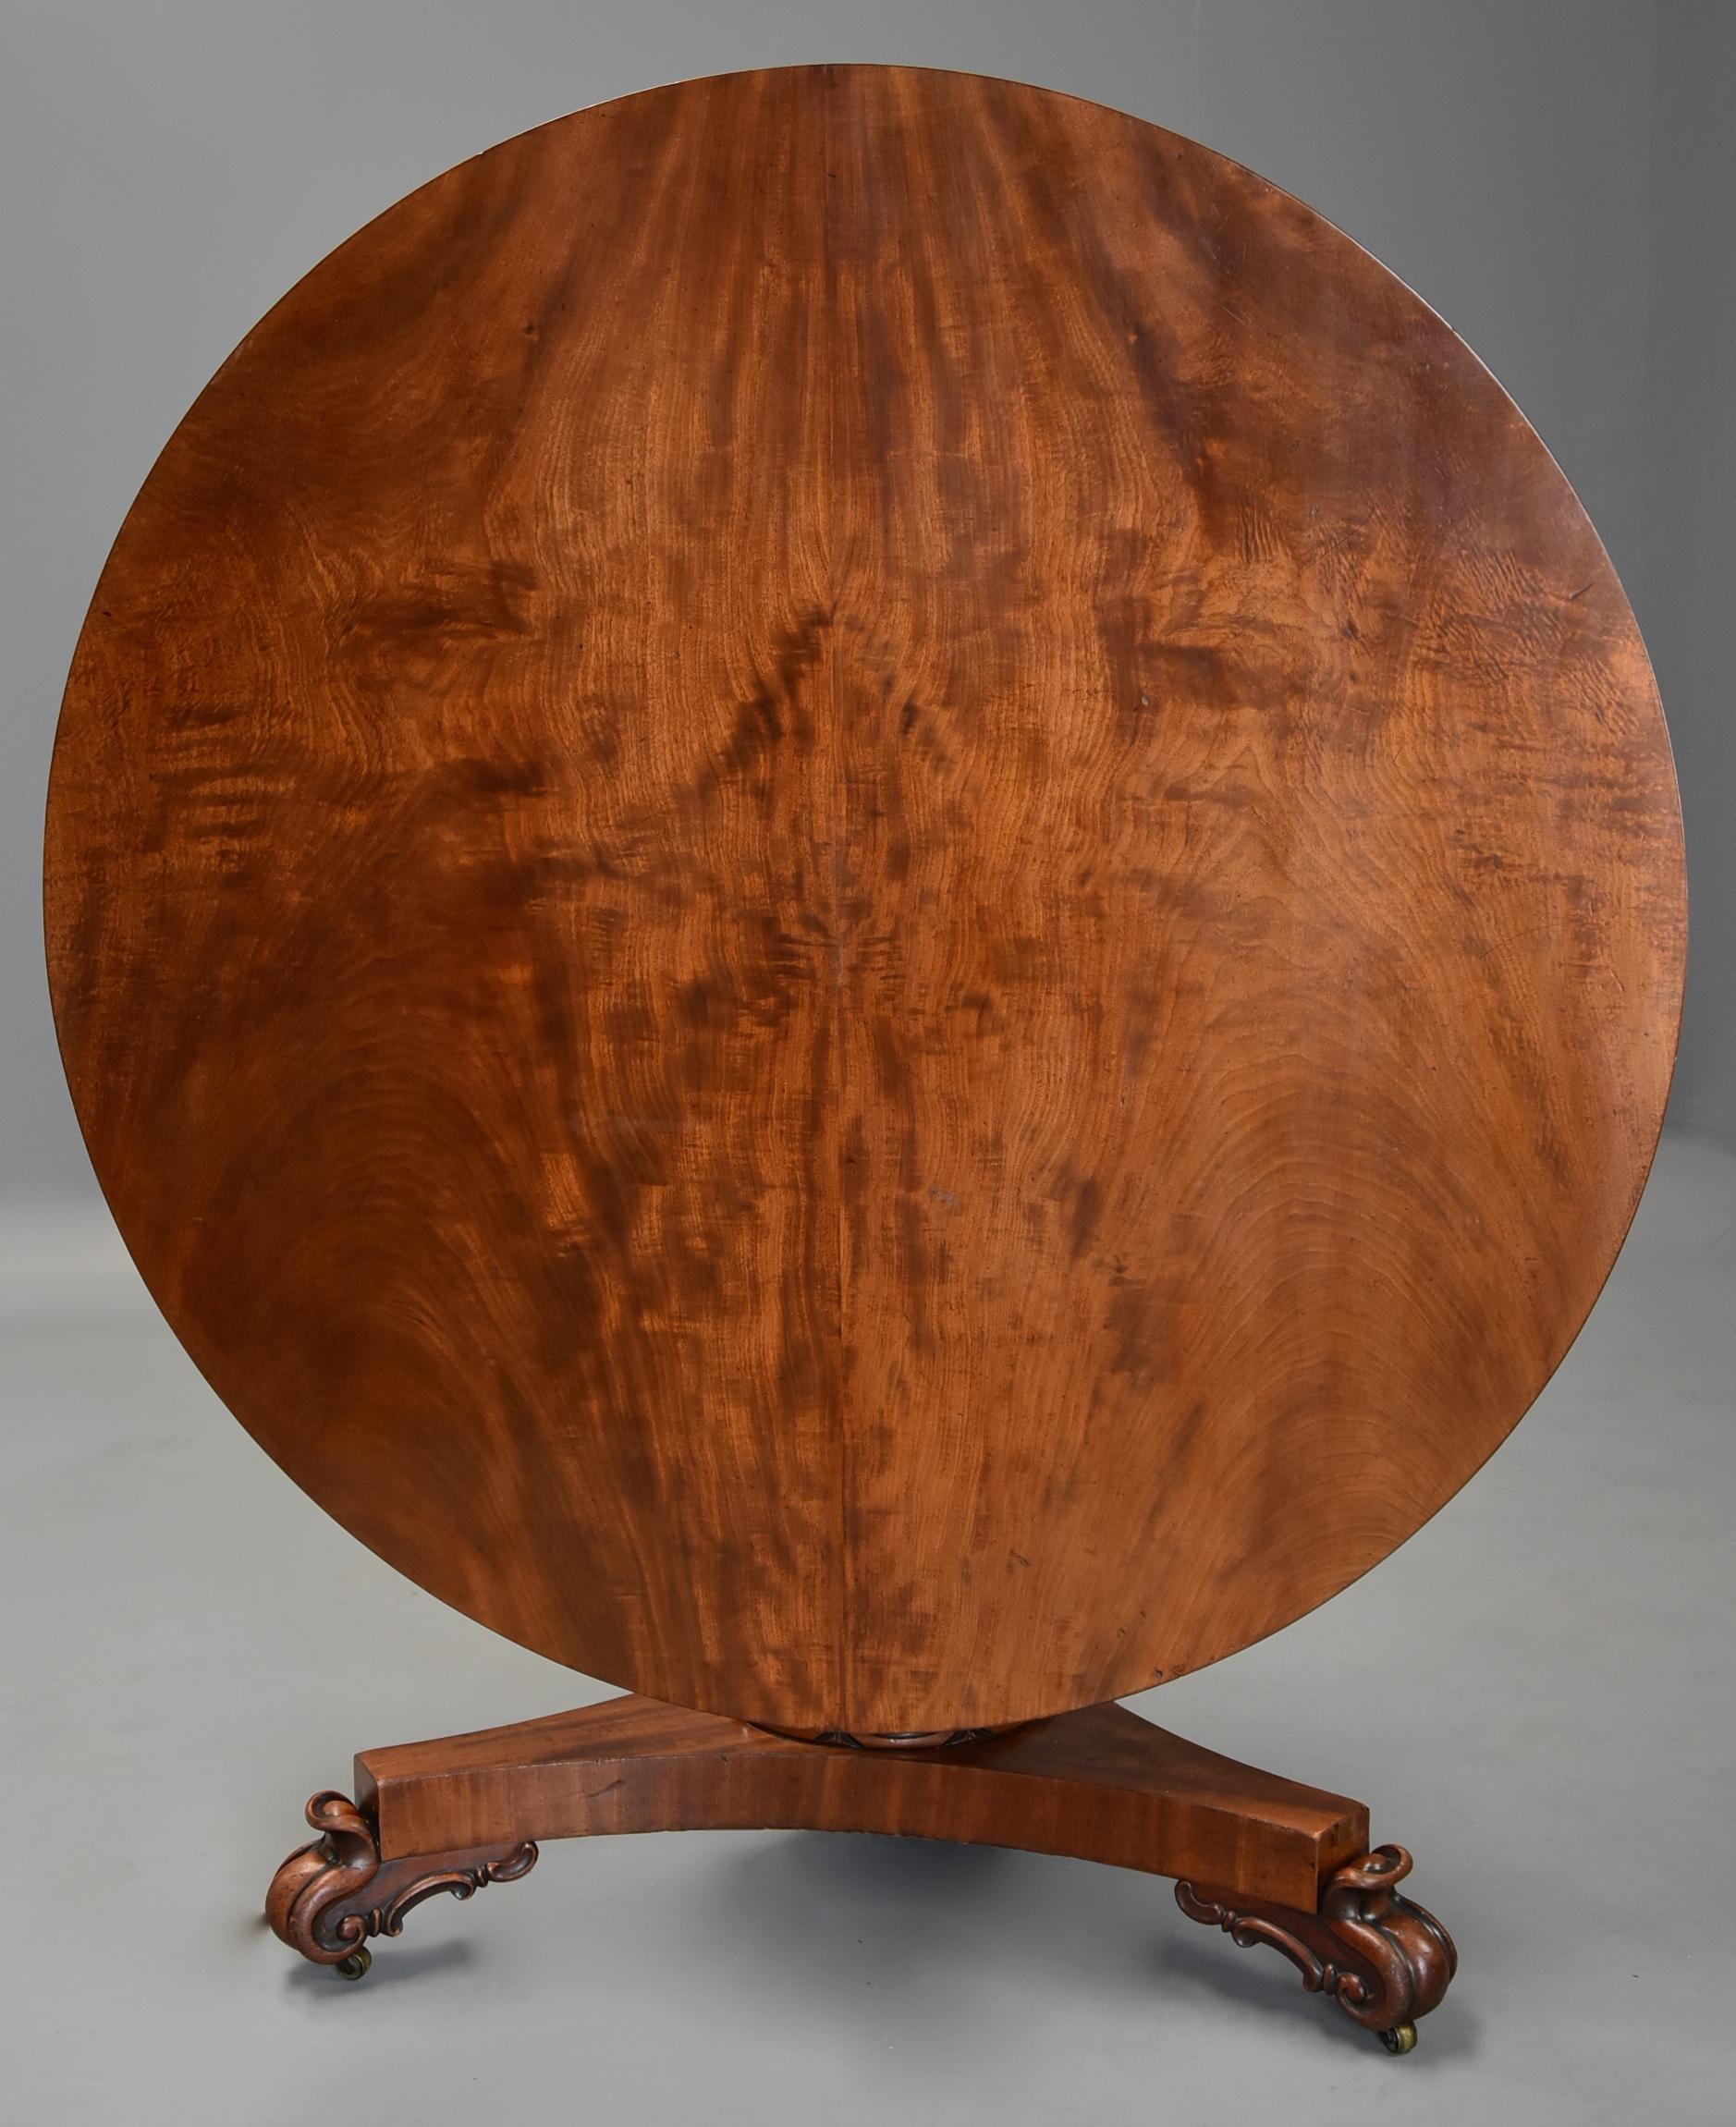 A mid-19th century mahogany centre (or breakfast) tilt top table of excellent patina.

This table consists of a circular finely figured mahogany top, cross banded edge leading down to a figured mahogany frieze with a moulded edge, all of excellent